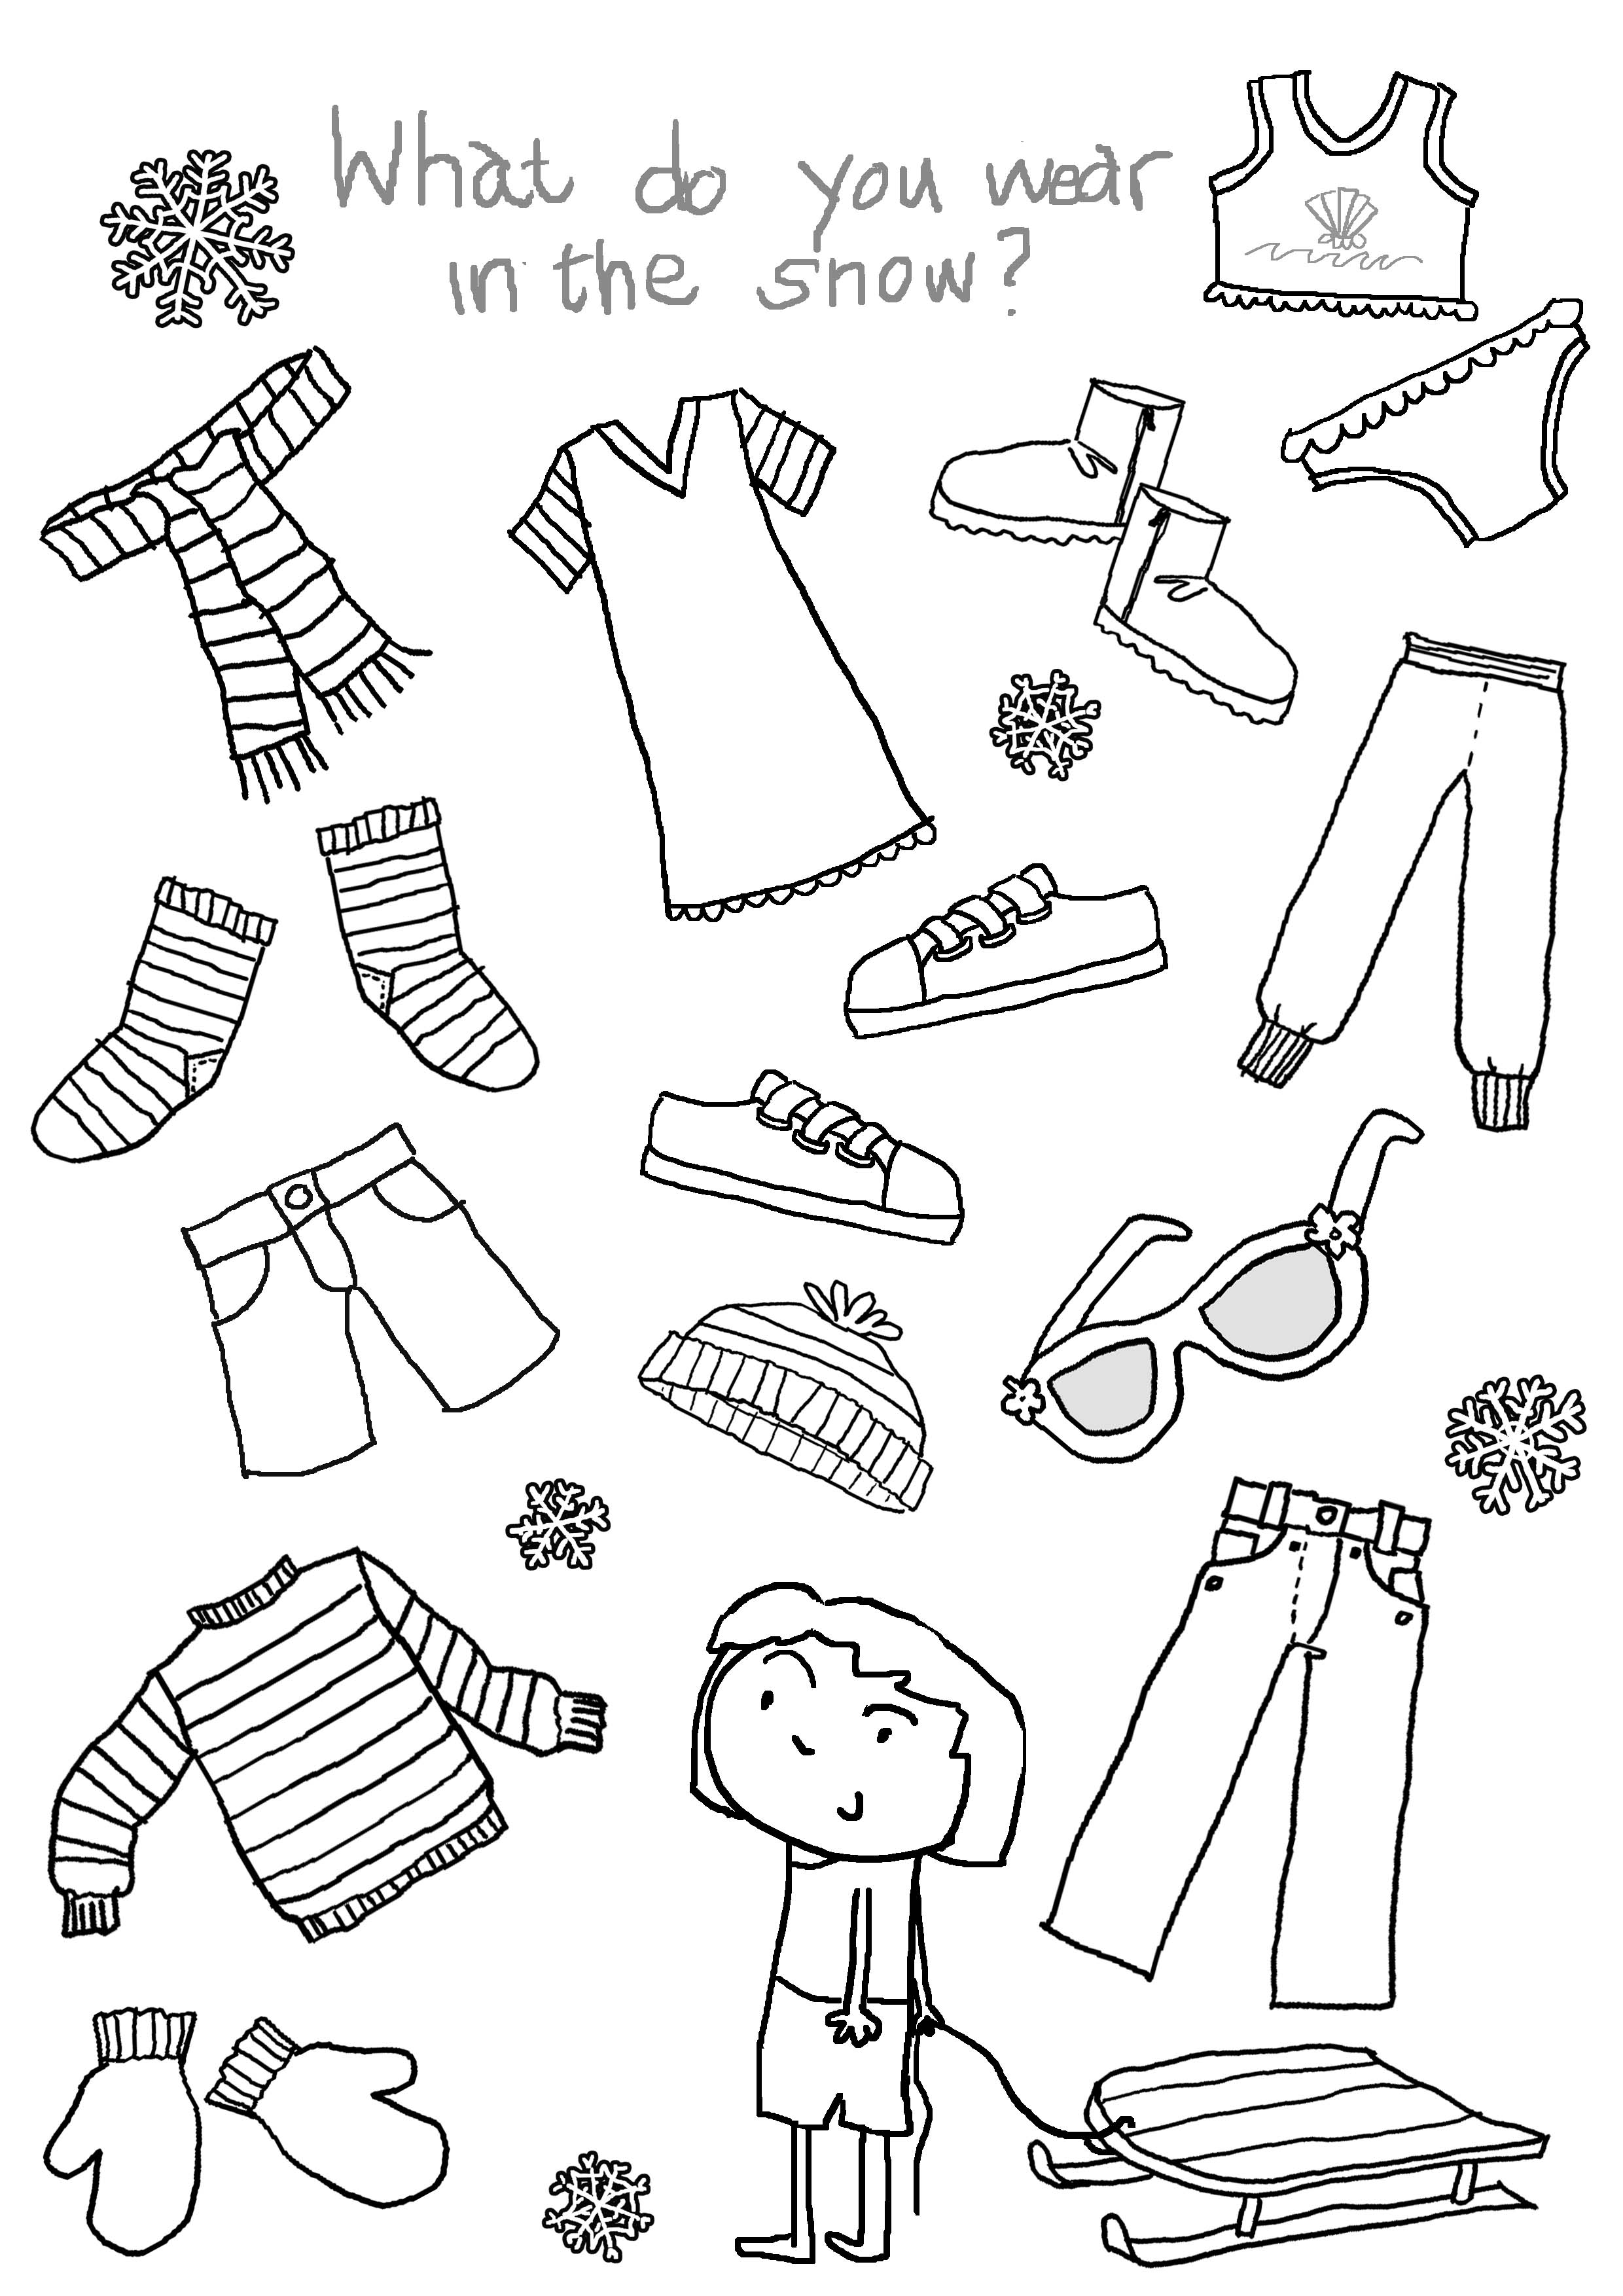 Winter Clothes Printable Worksheets Image